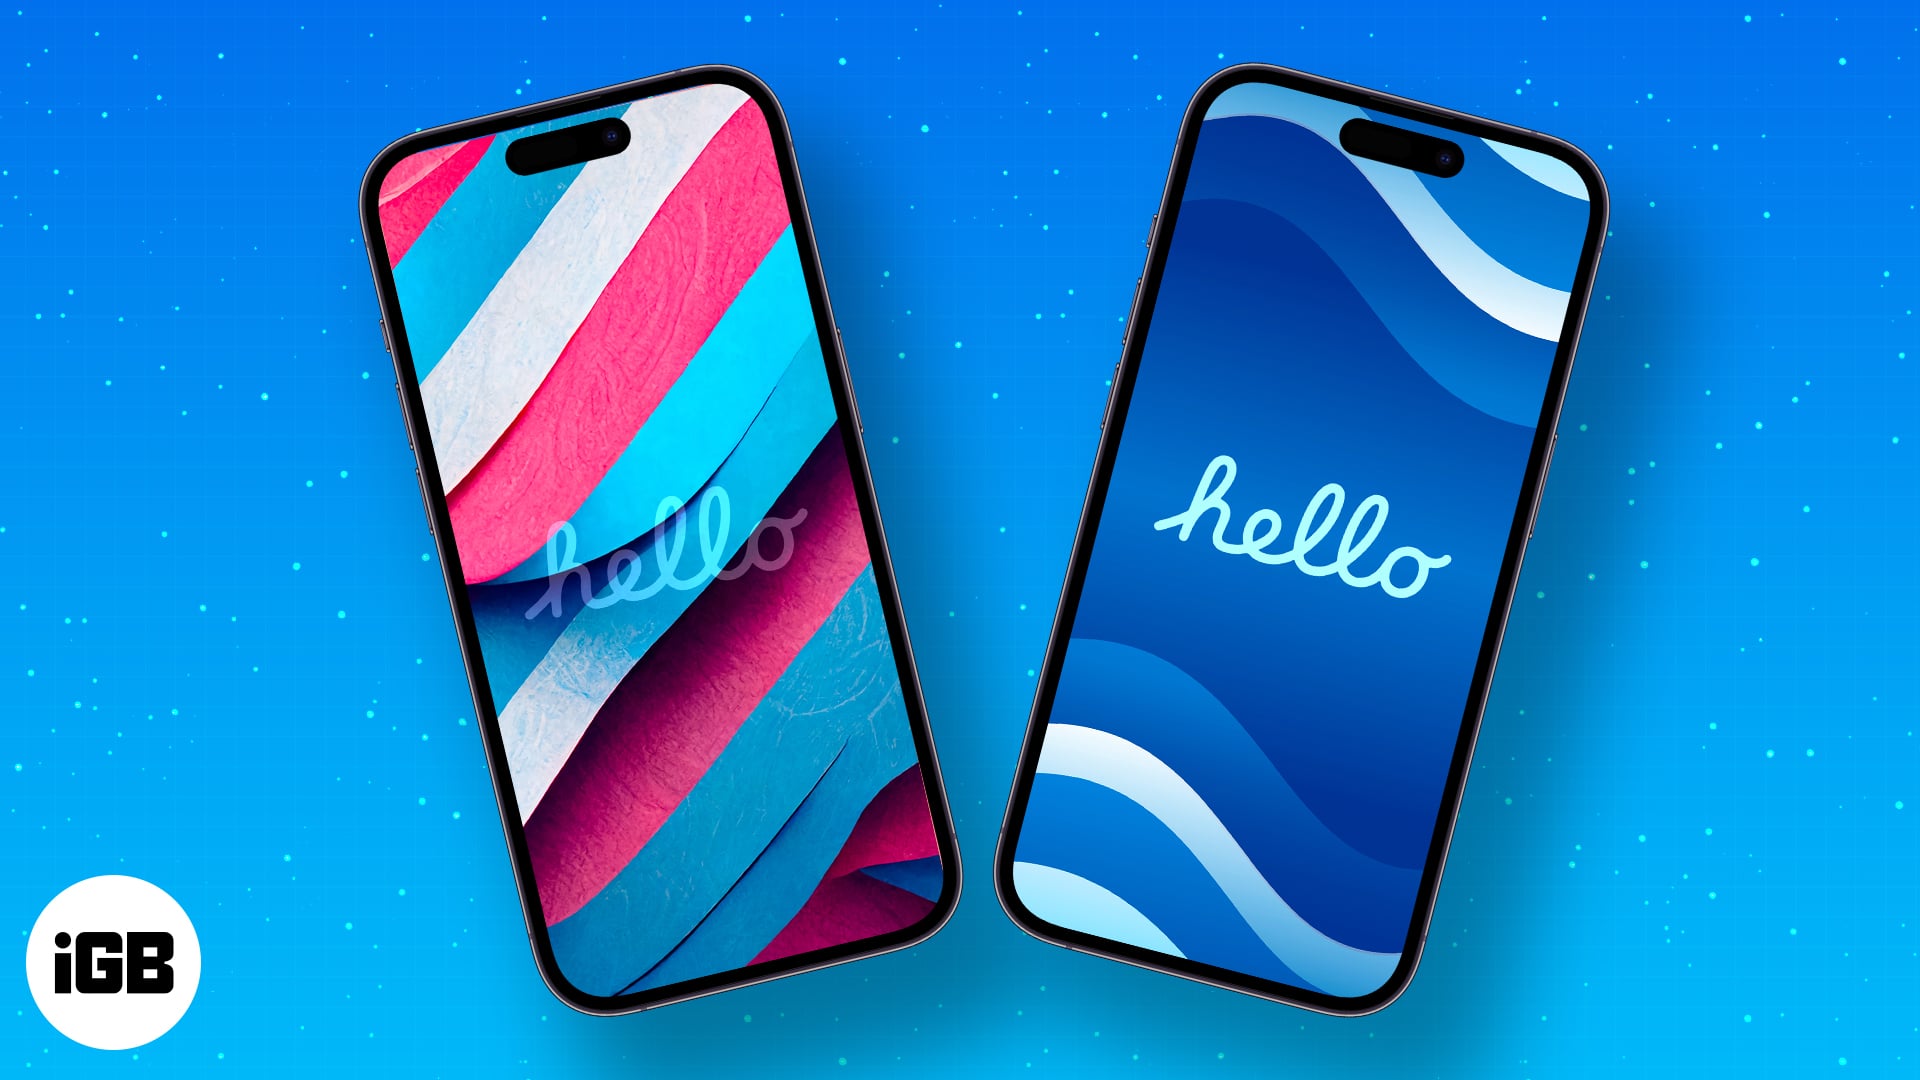 Download Apple hello iPhone wallpapers for free in 2023 - iGeeksBlog